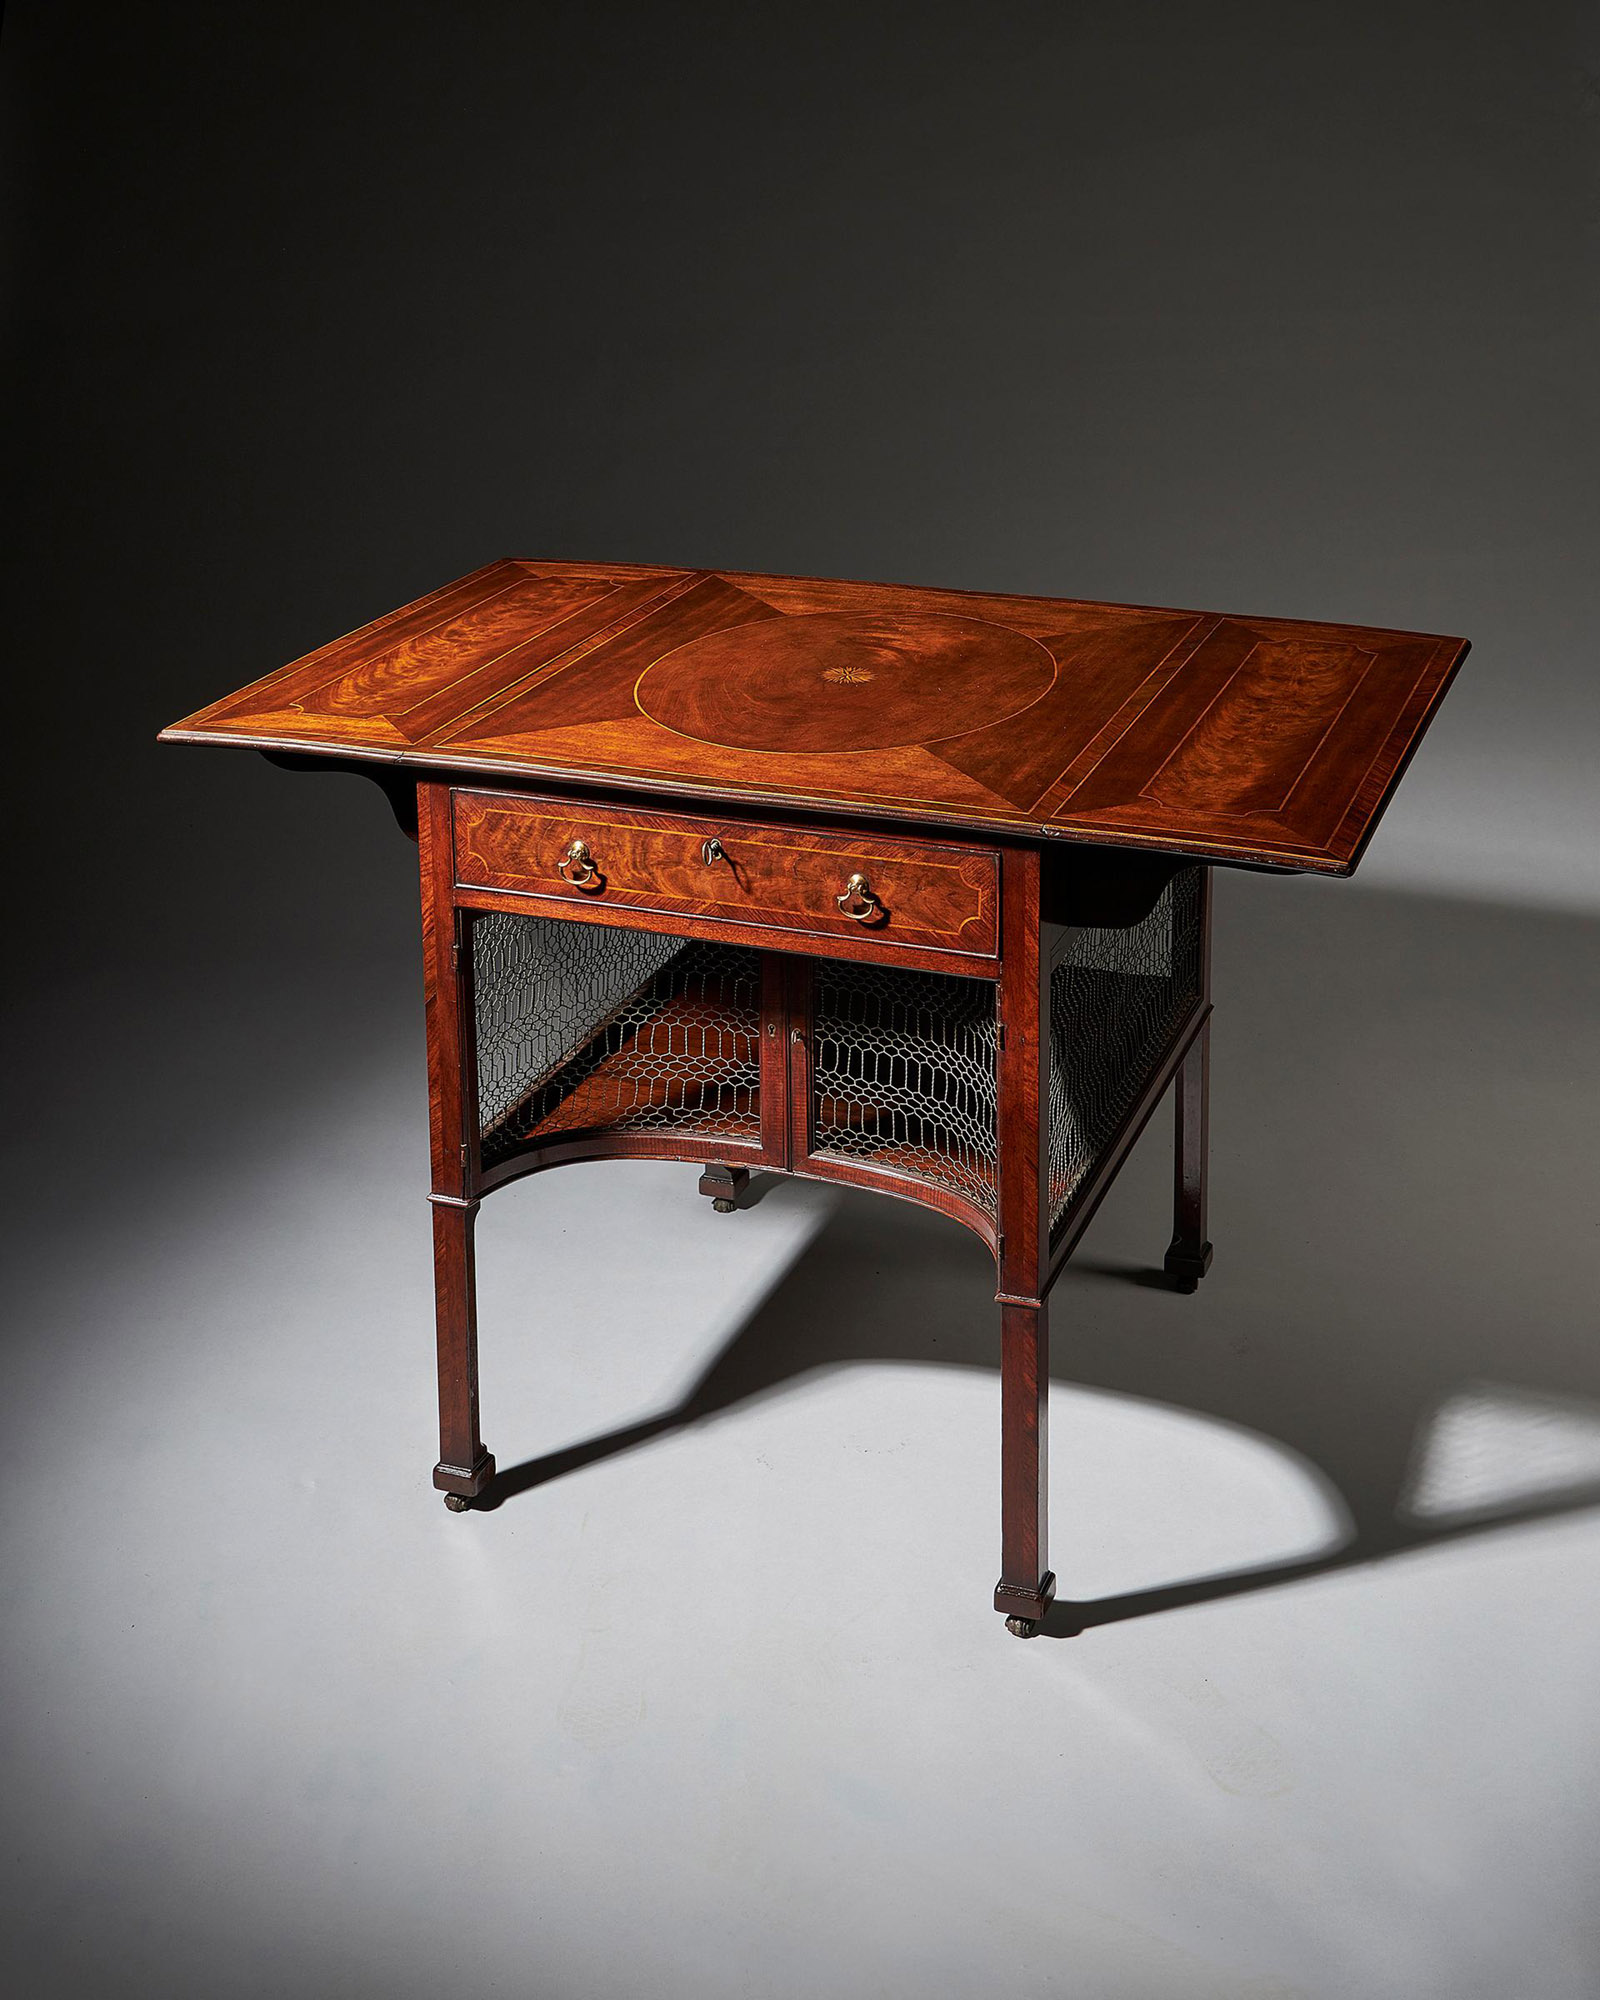 An extremely fine and rare early George III mahogany supper table plausibly by Thomas Chippendale 2